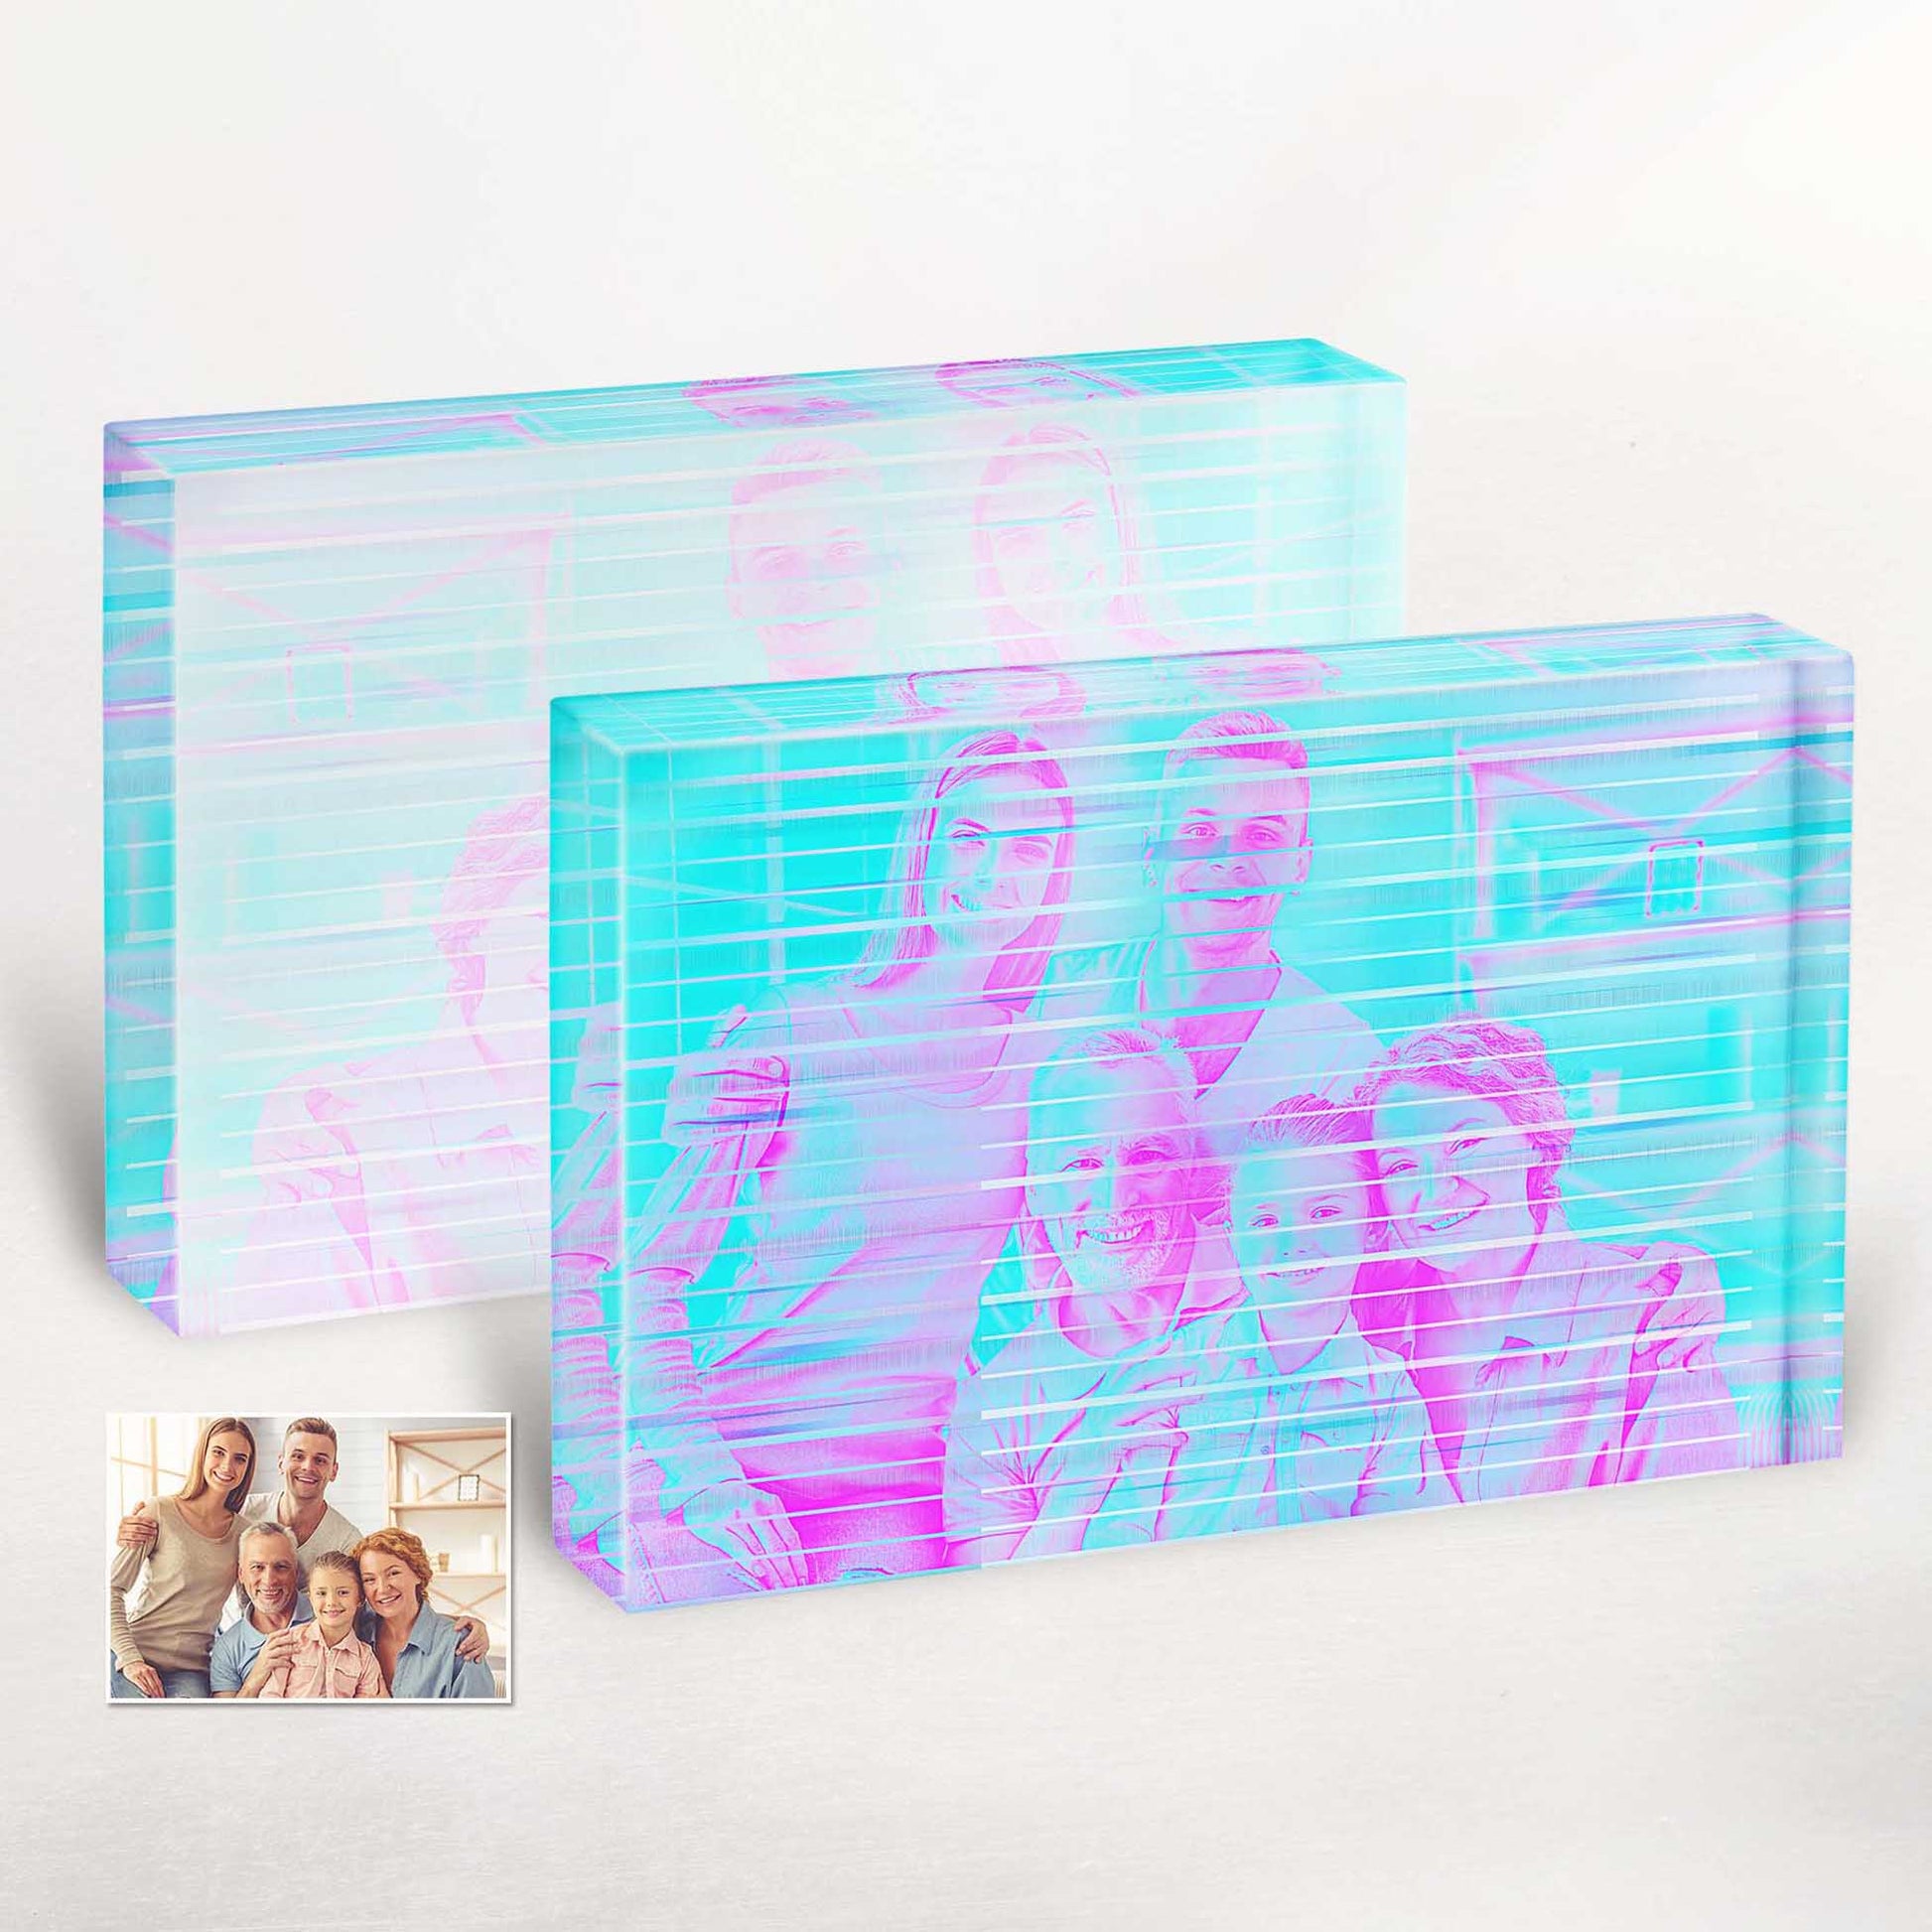 Personalised Purple and Blue Signal Acrylic Block Photo: A trendy and cool gift idea. Surprise your loved ones with a stylish and modern acrylic block photo, customized with a unique purple and blue signal design.